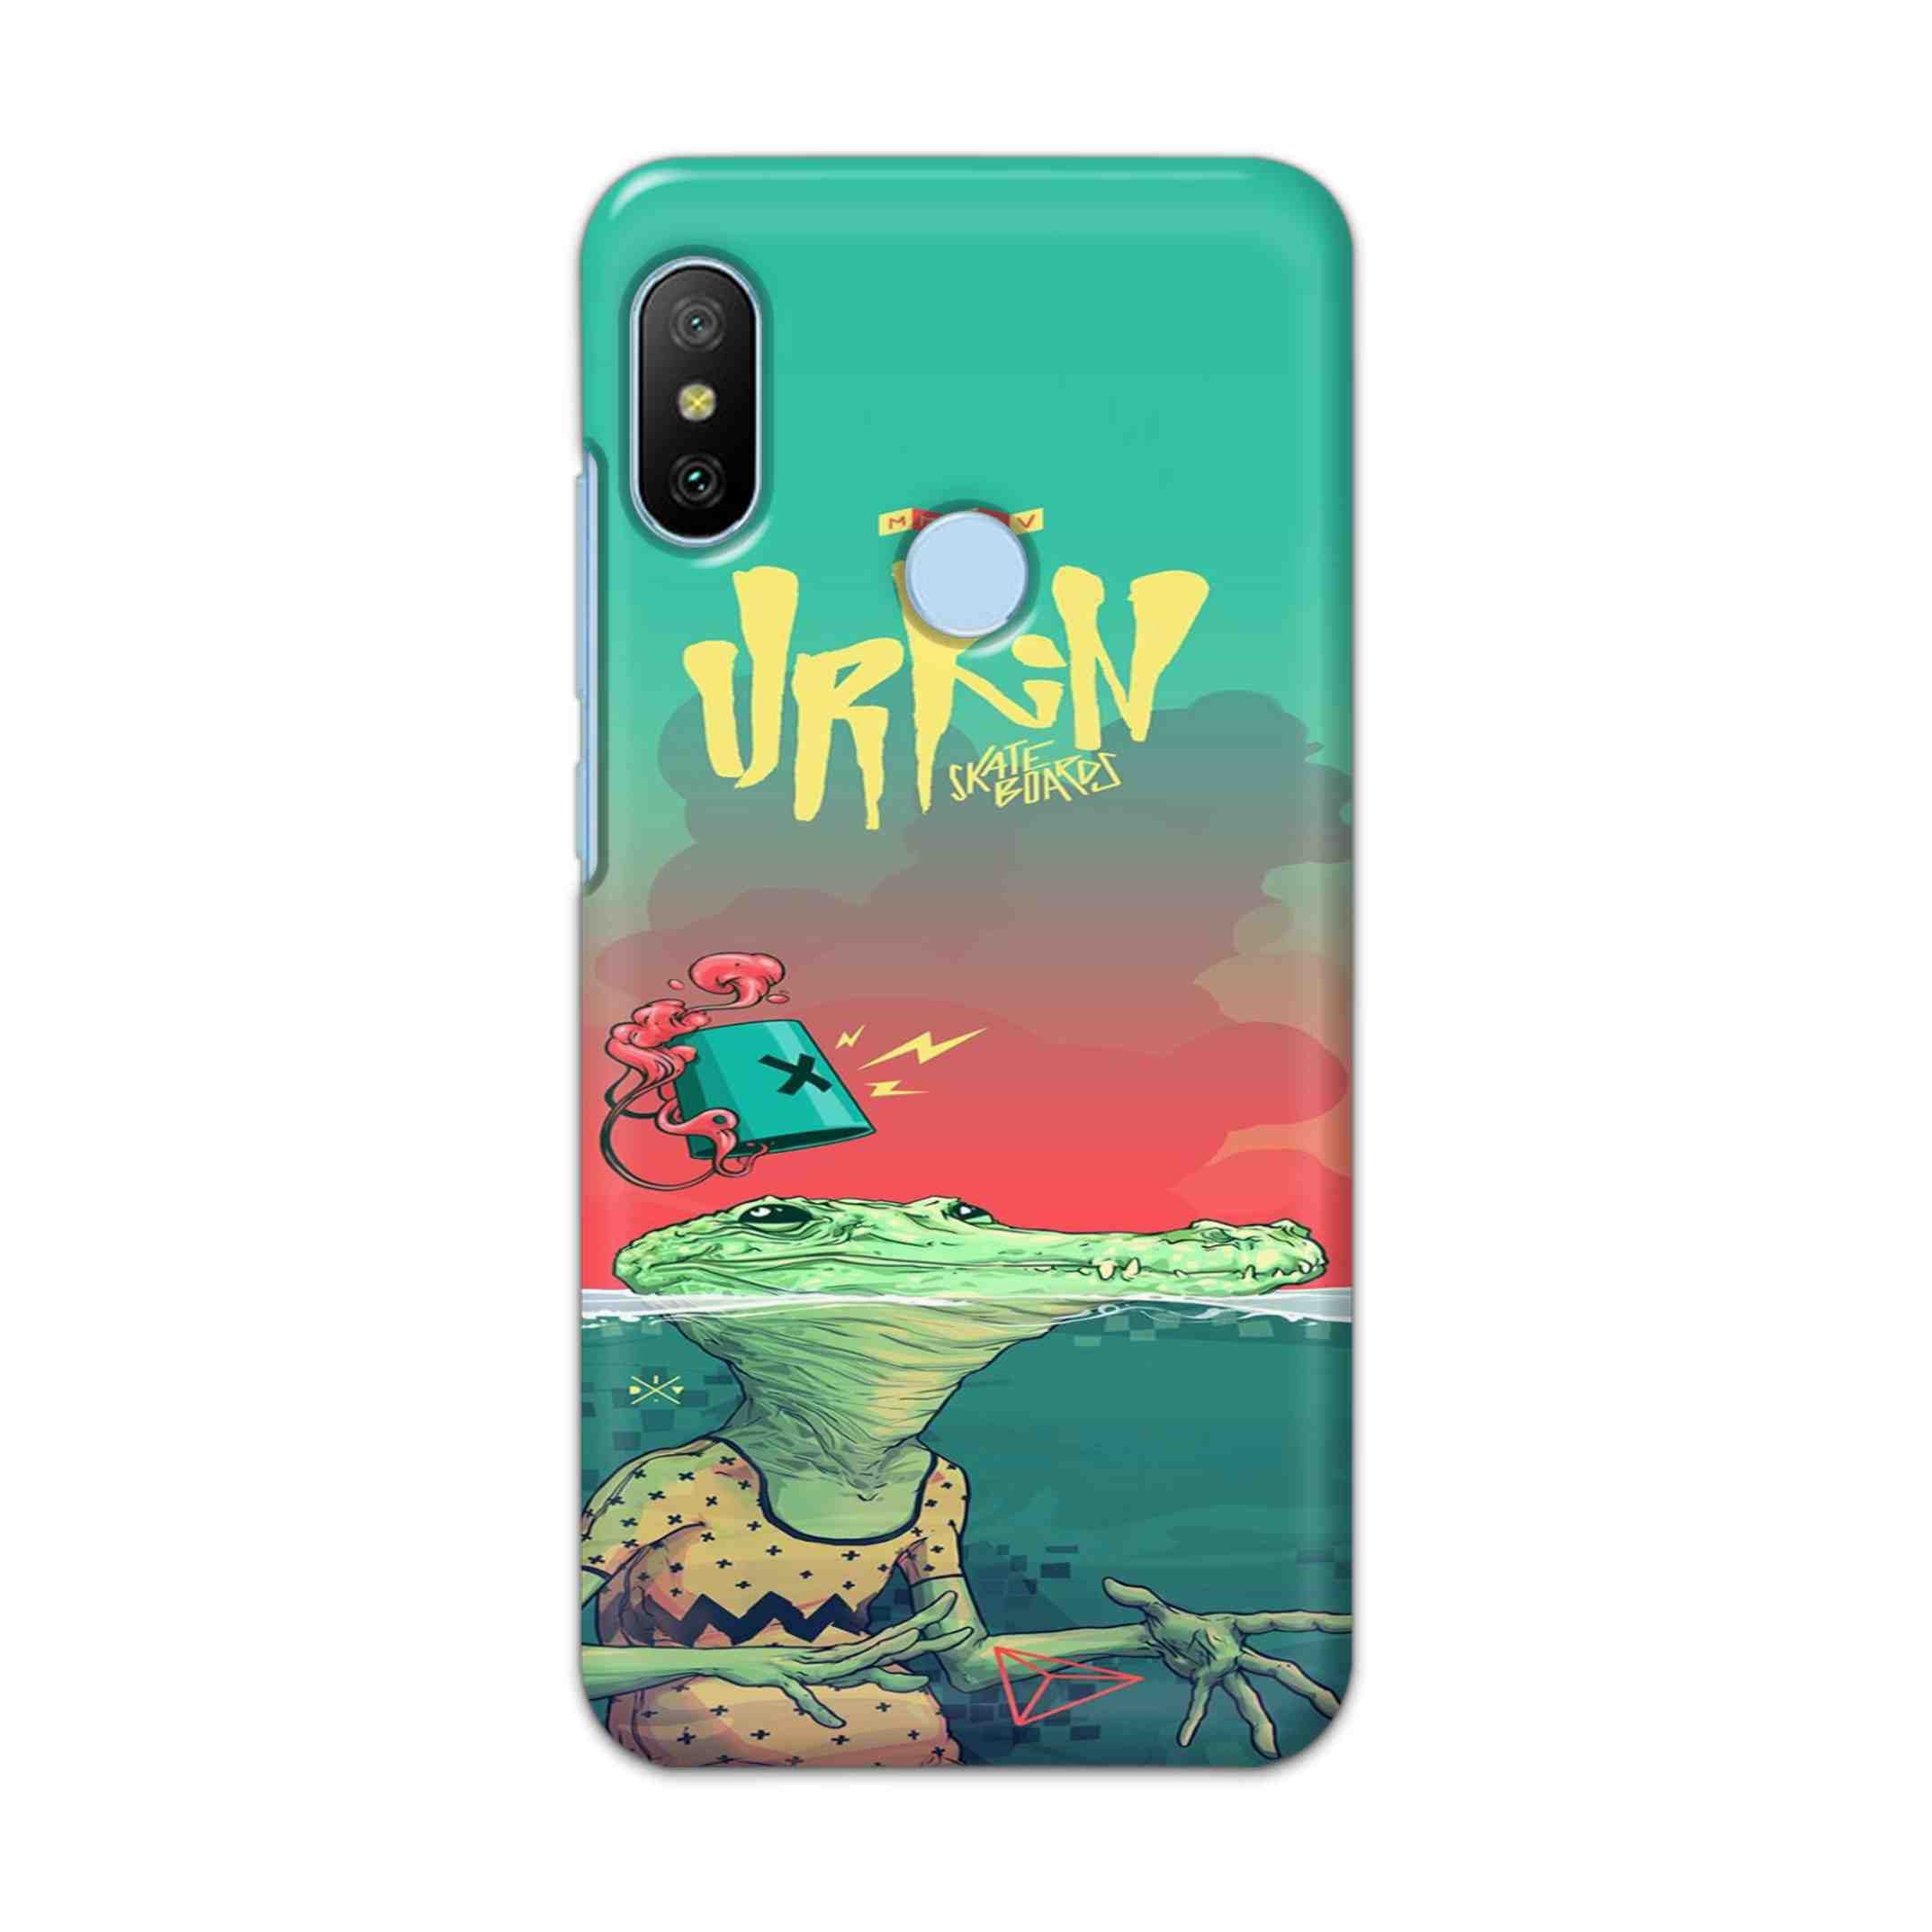 Buy Urkin Hard Back Mobile Phone Case/Cover For Xiaomi Redmi 6 Pro Online